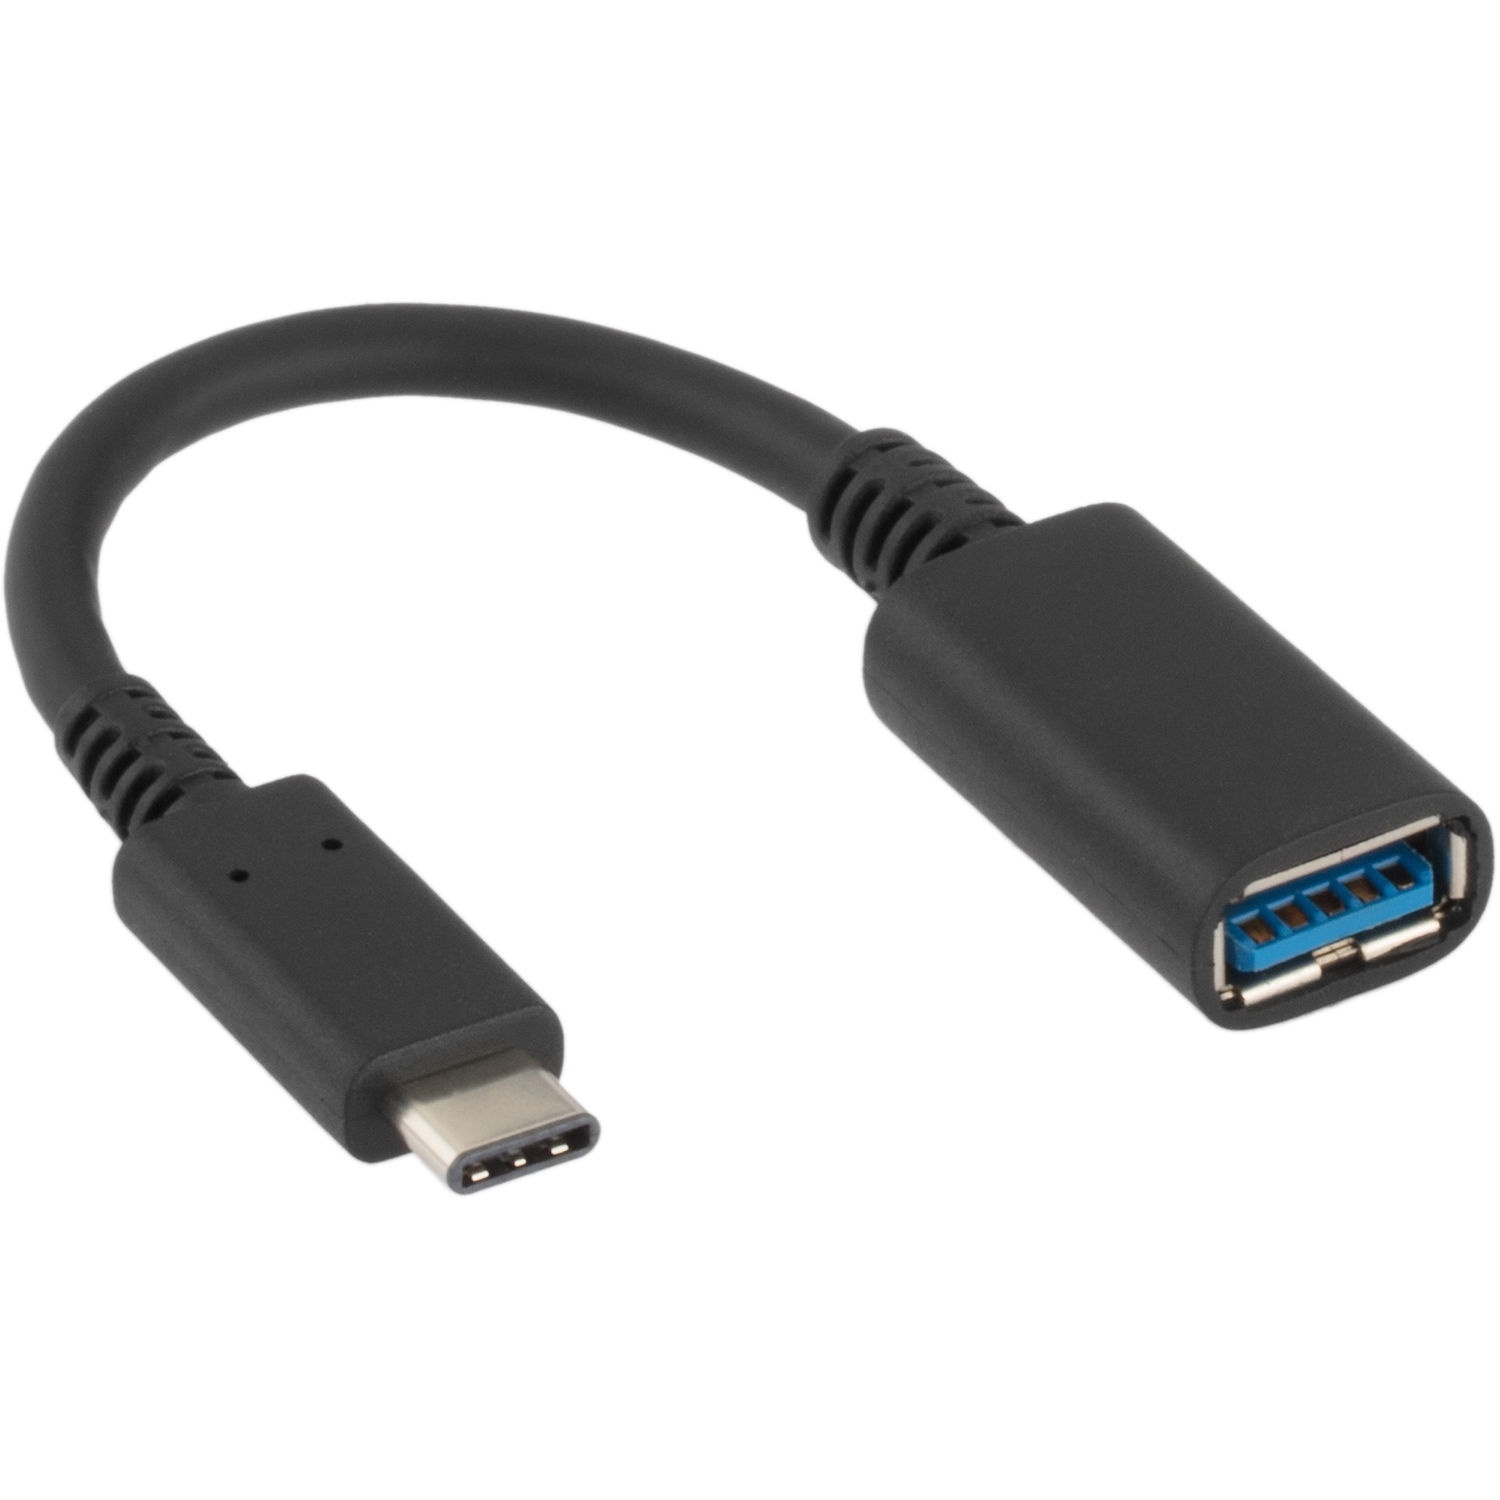 Pearstone USB 3.0 Type-C to USB Type-A Adapter (6")